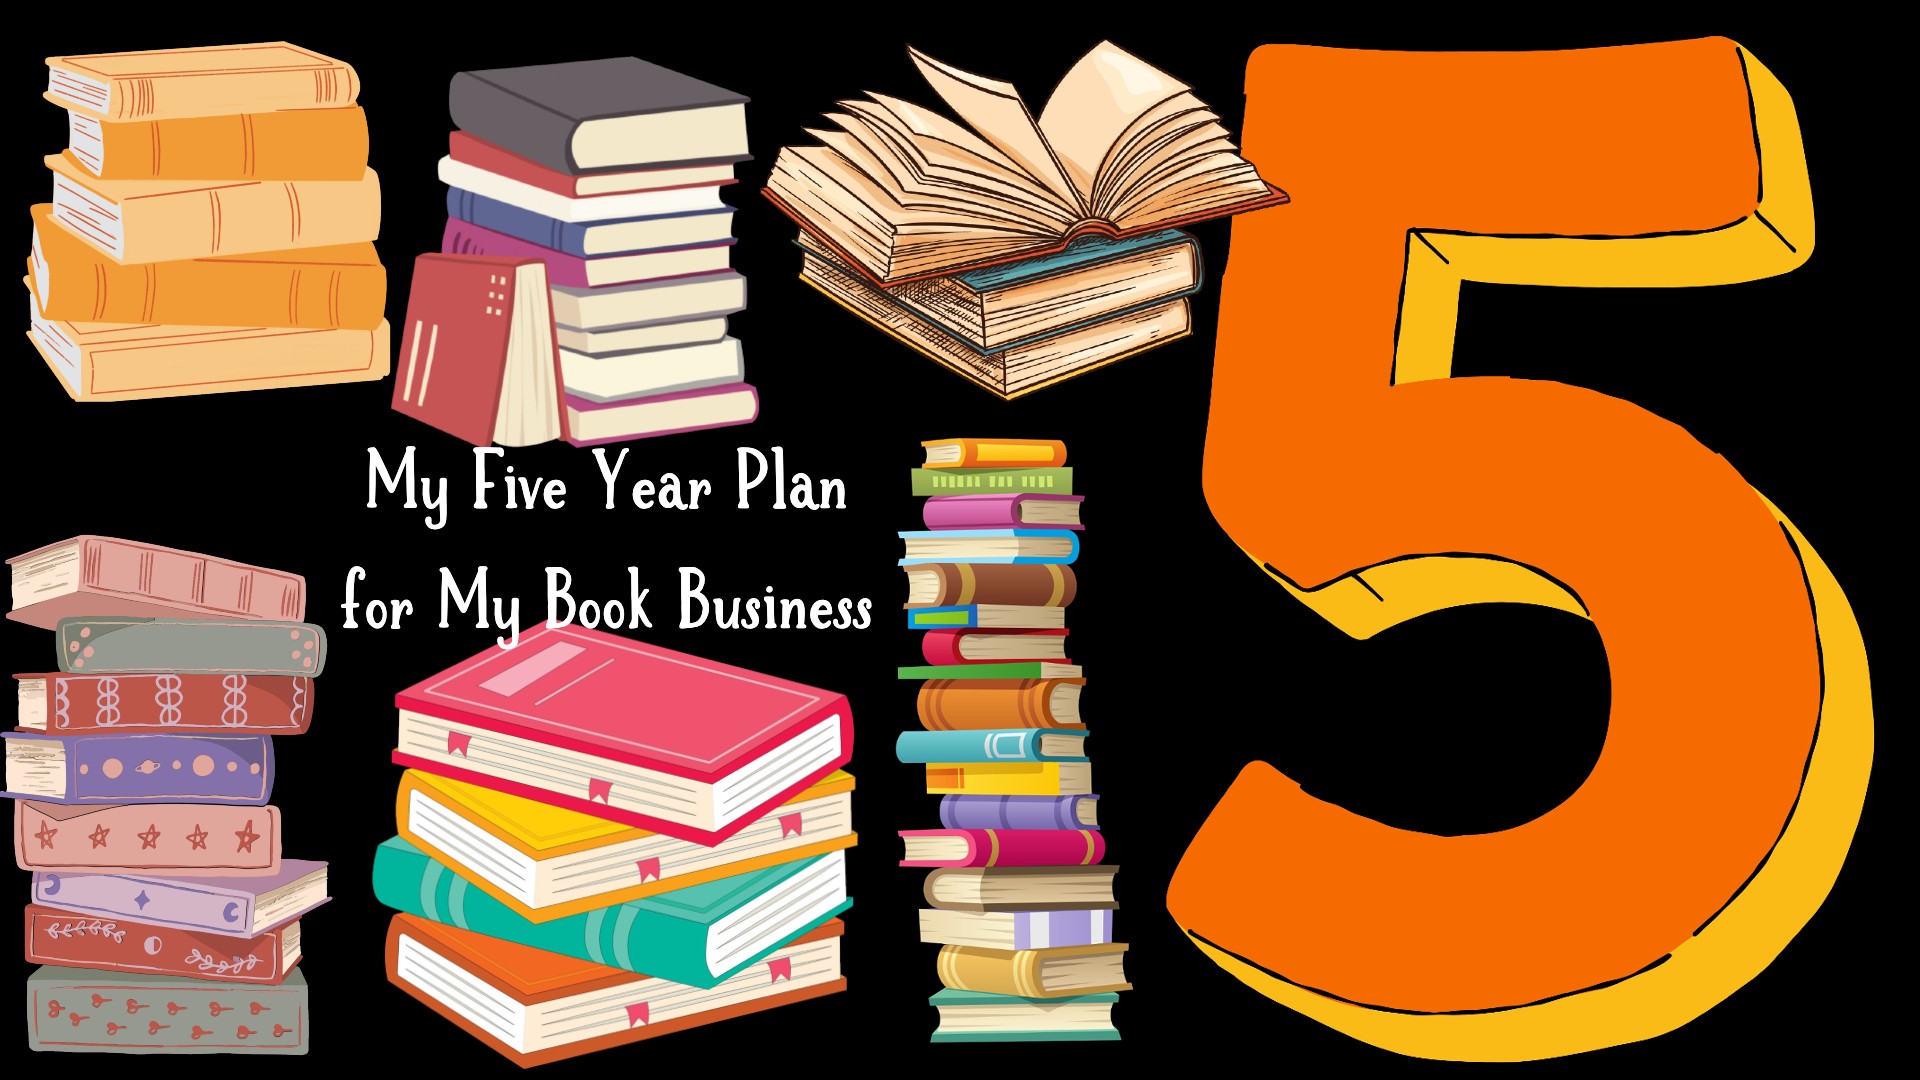 My Five Year Plan for My Book Business: I’m Creating a Passive Income Machine